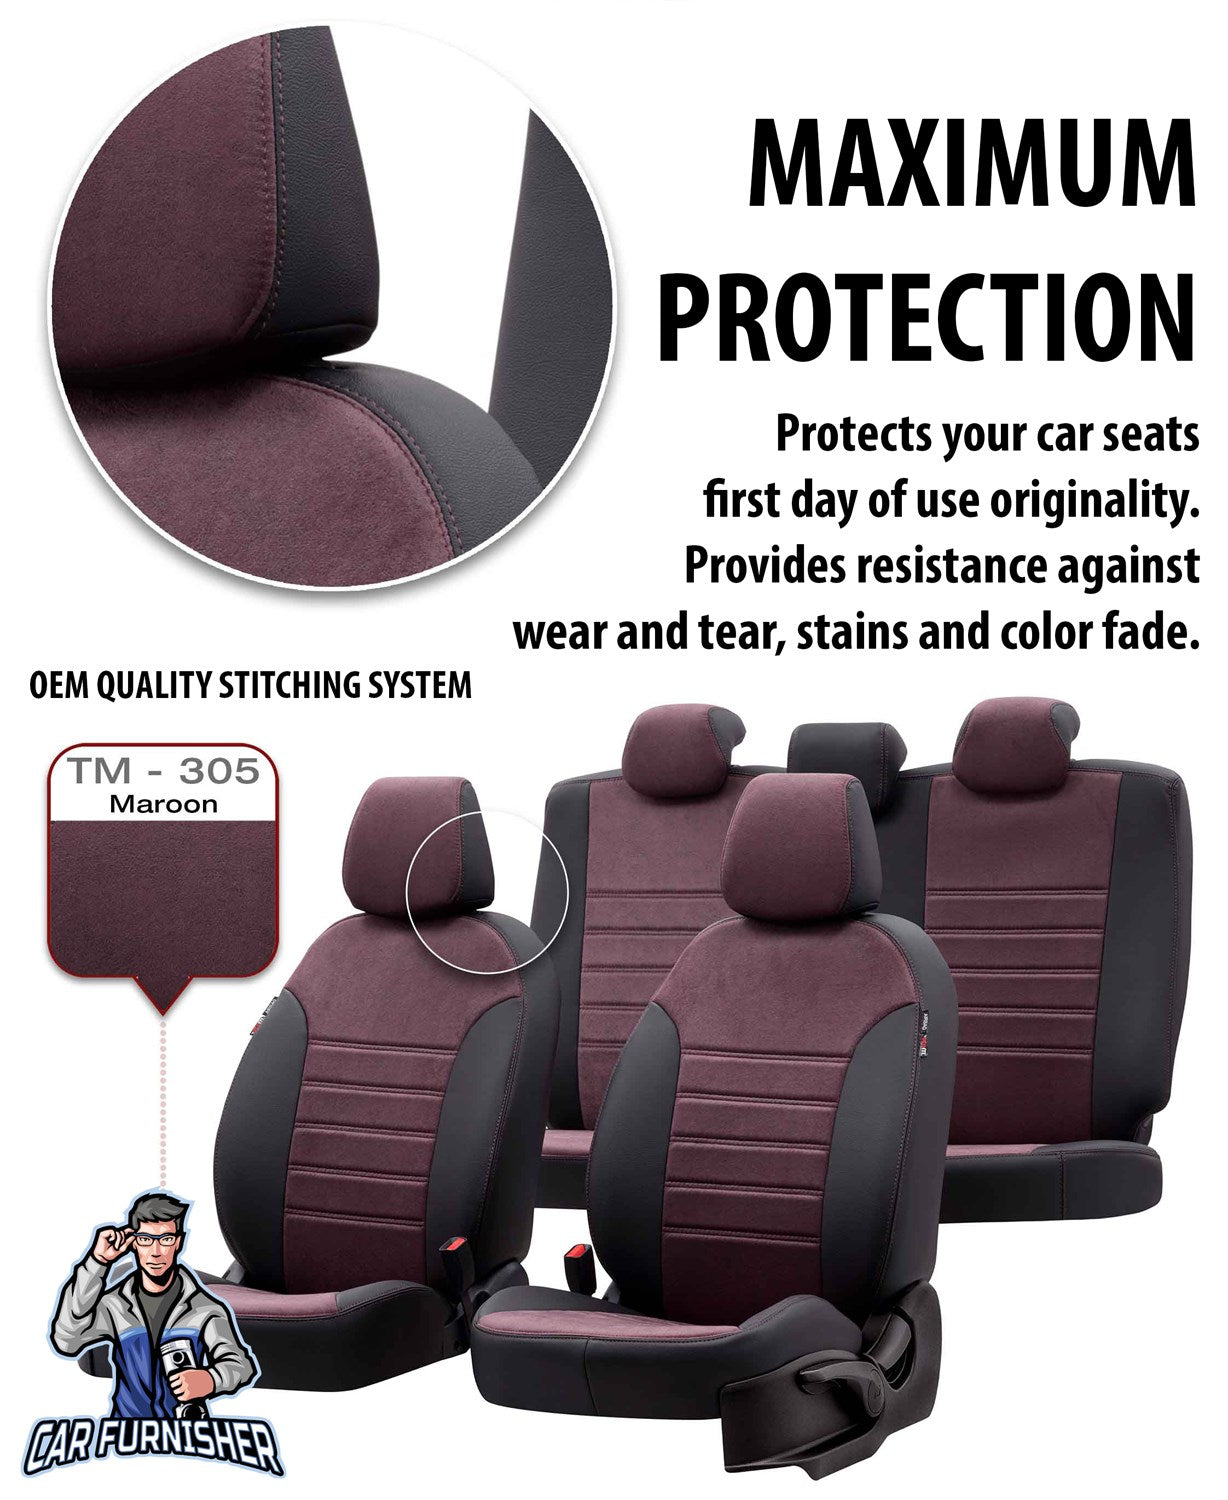 Renault Fluence Seat Covers Milano Suede Design Burgundy Leather & Suede Fabric